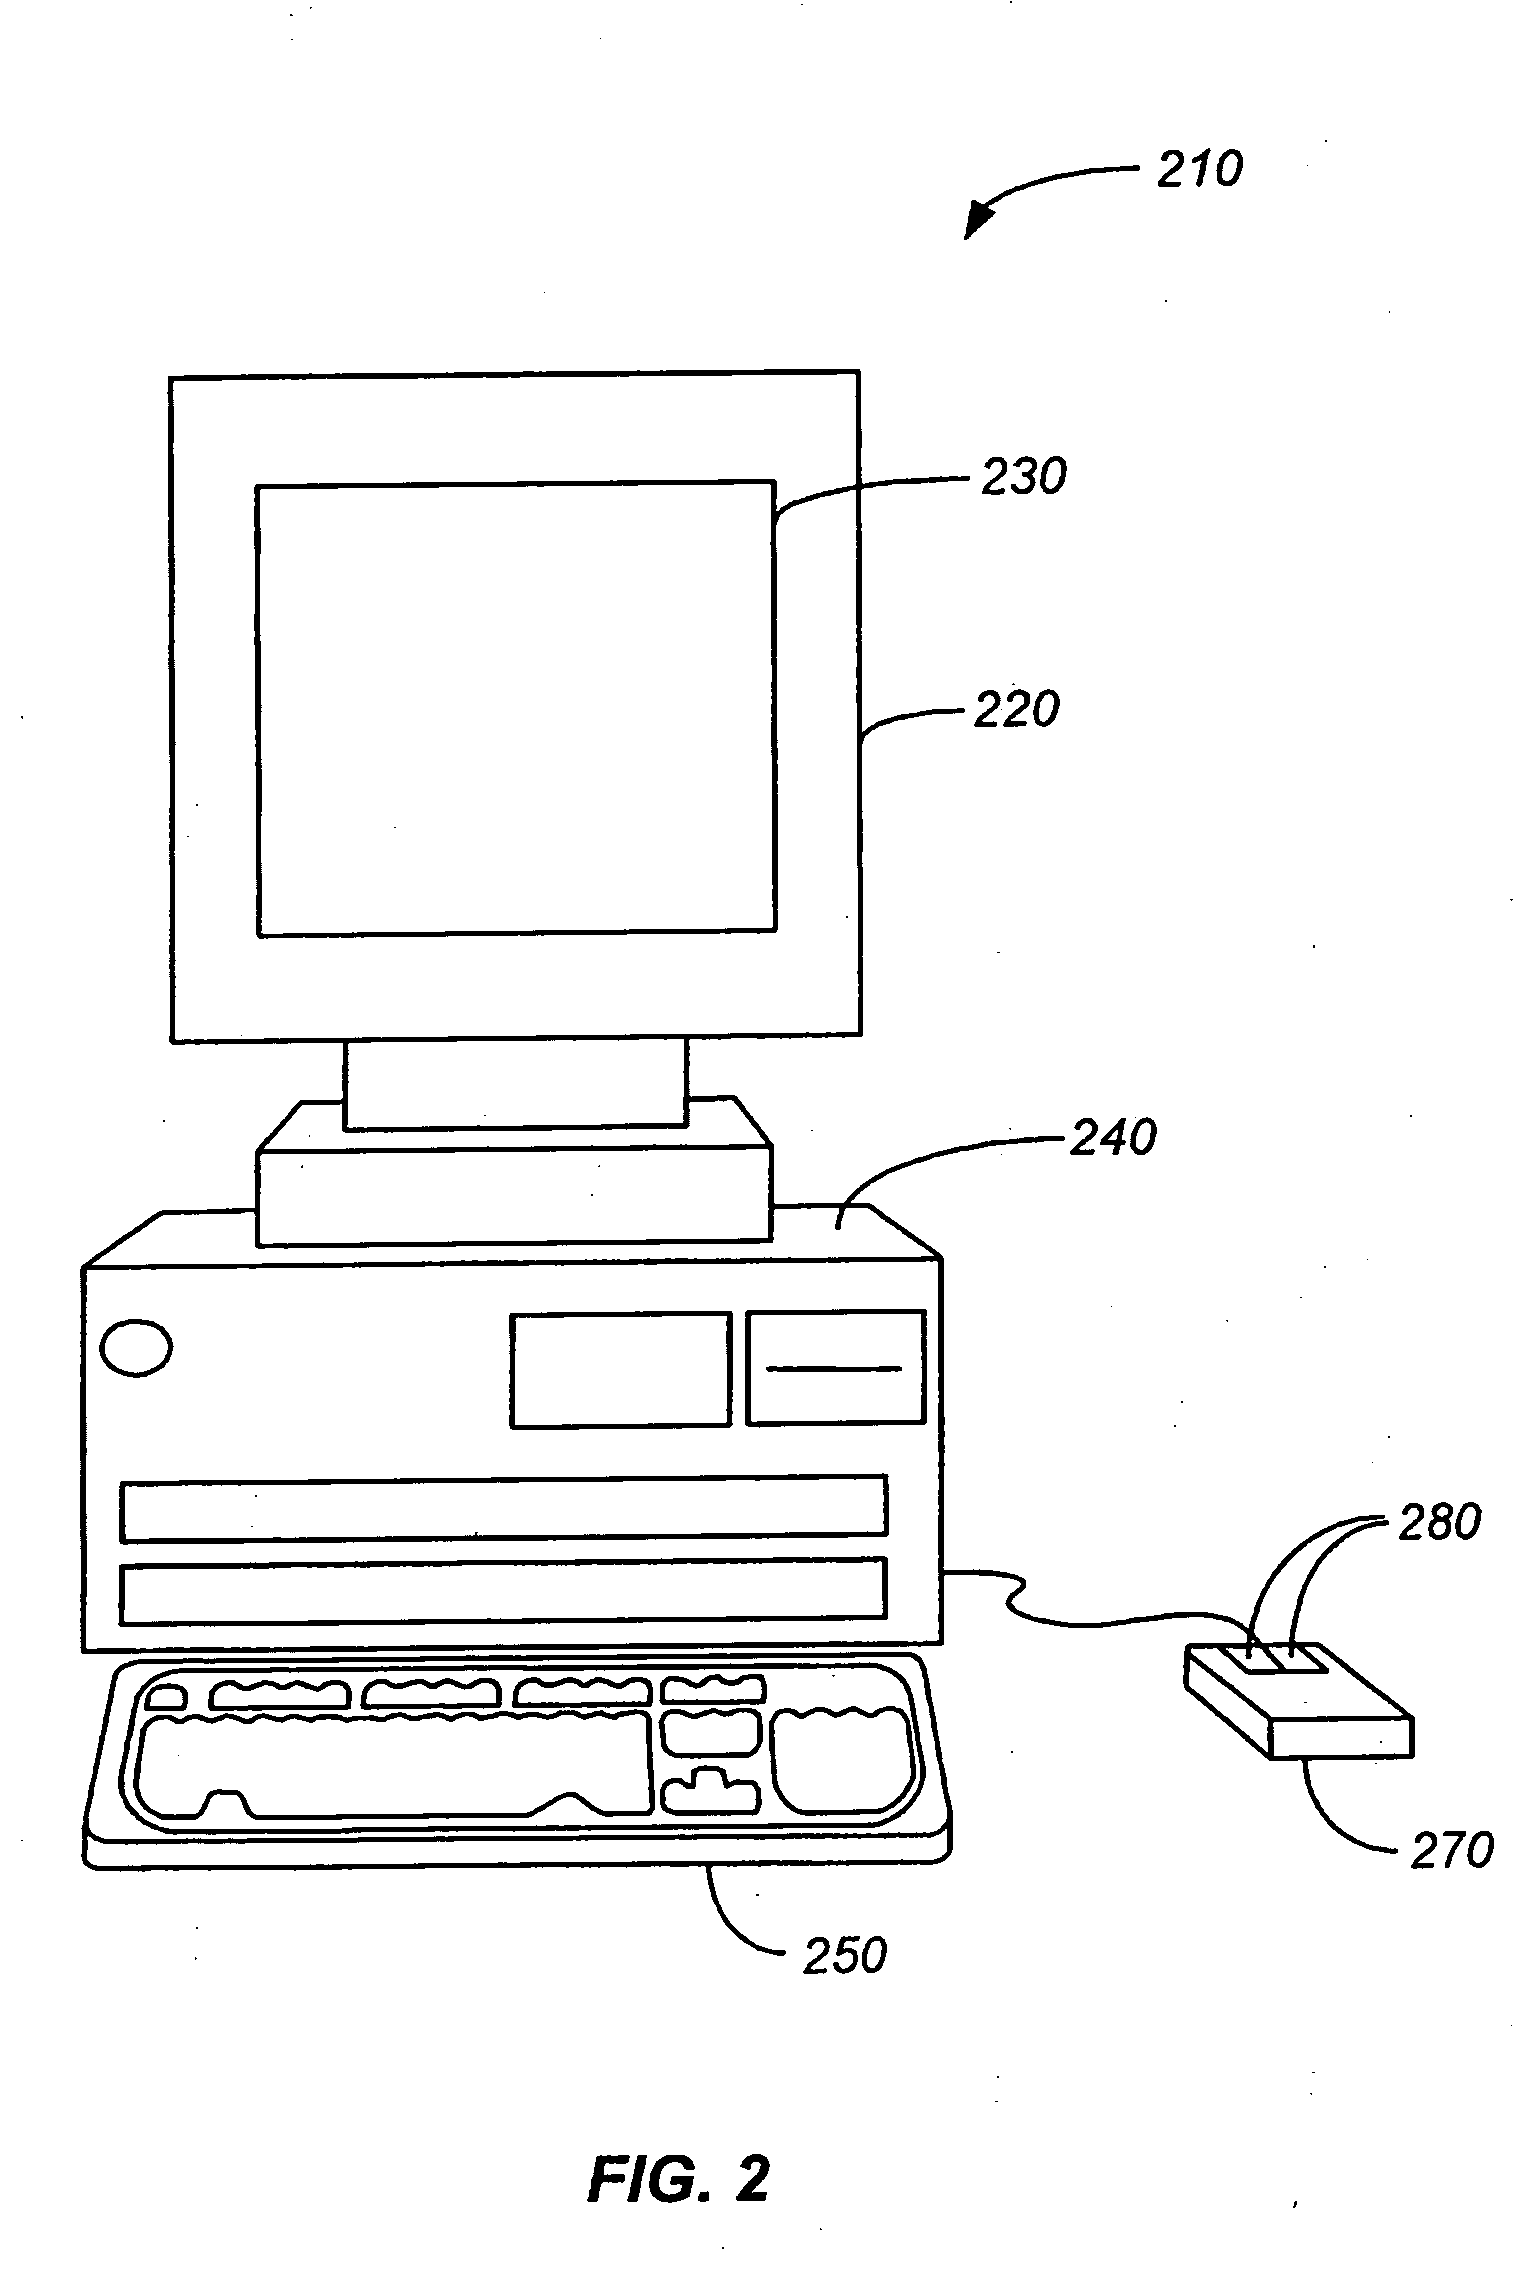 Method and system for scanning apertureless fluorescence microscope